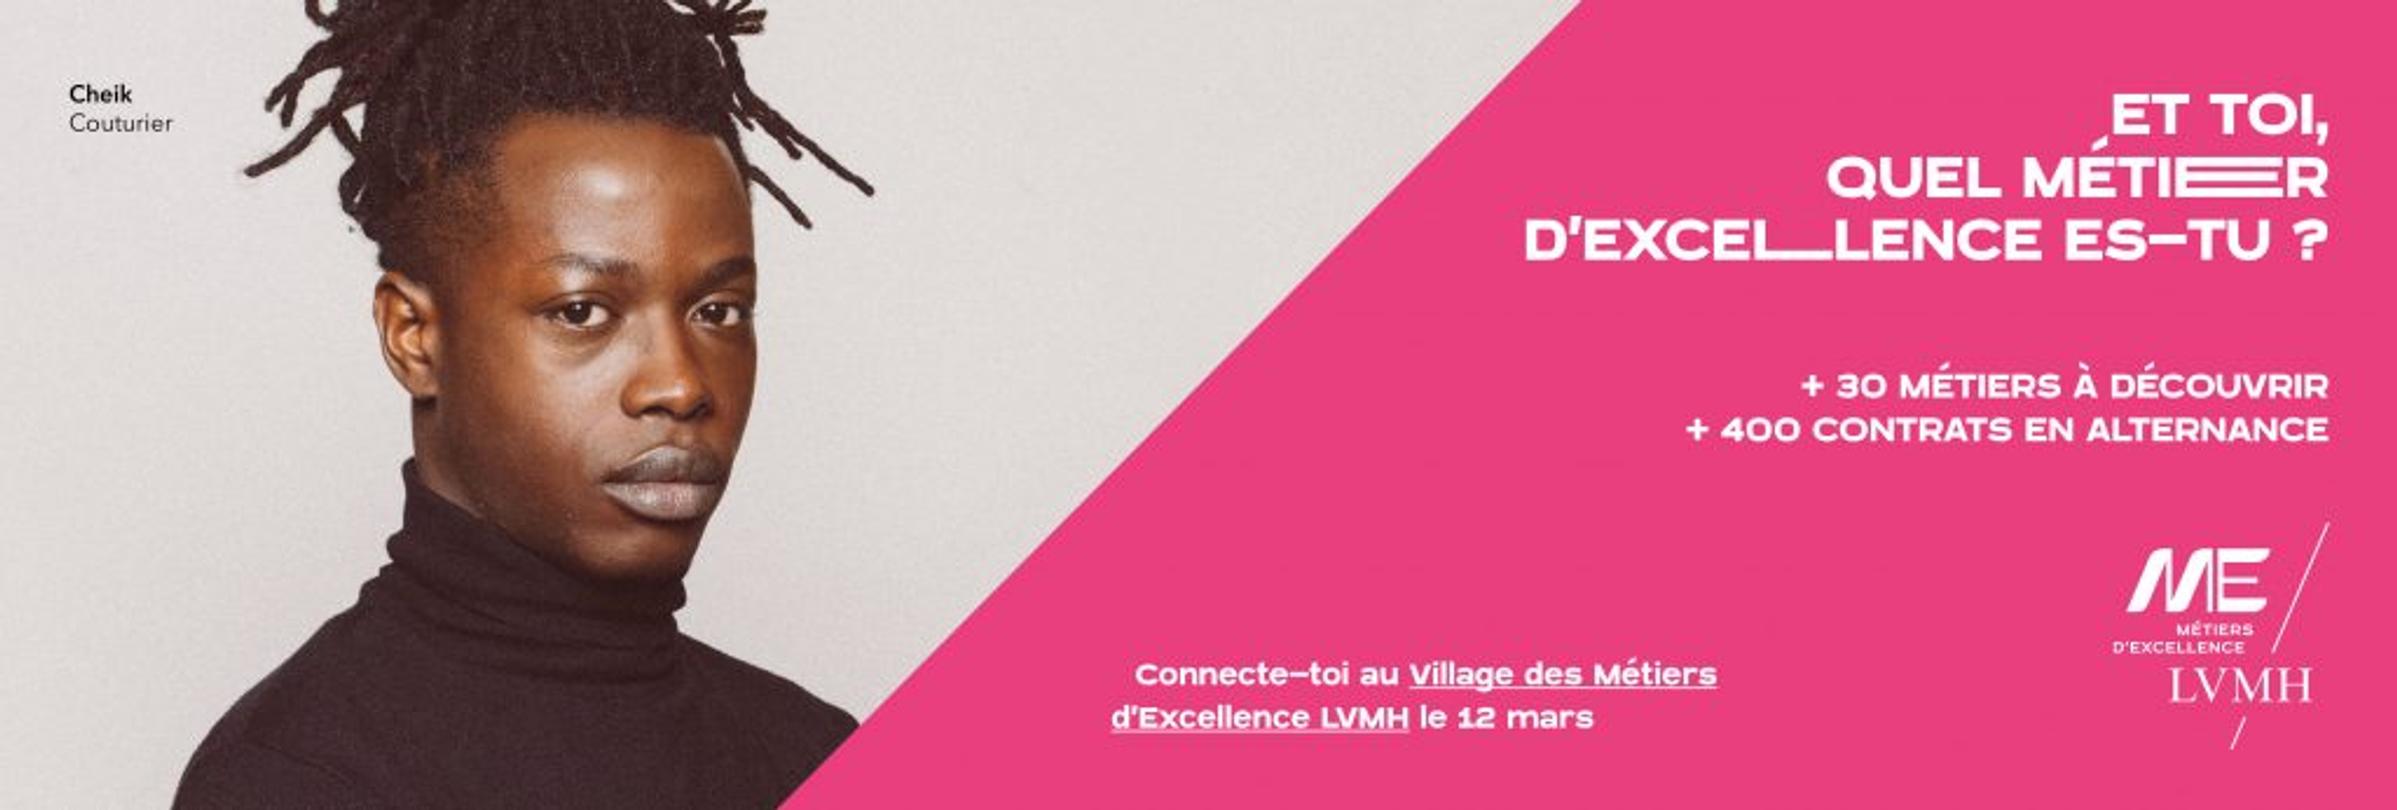 LVMH formation metiers d'excellence